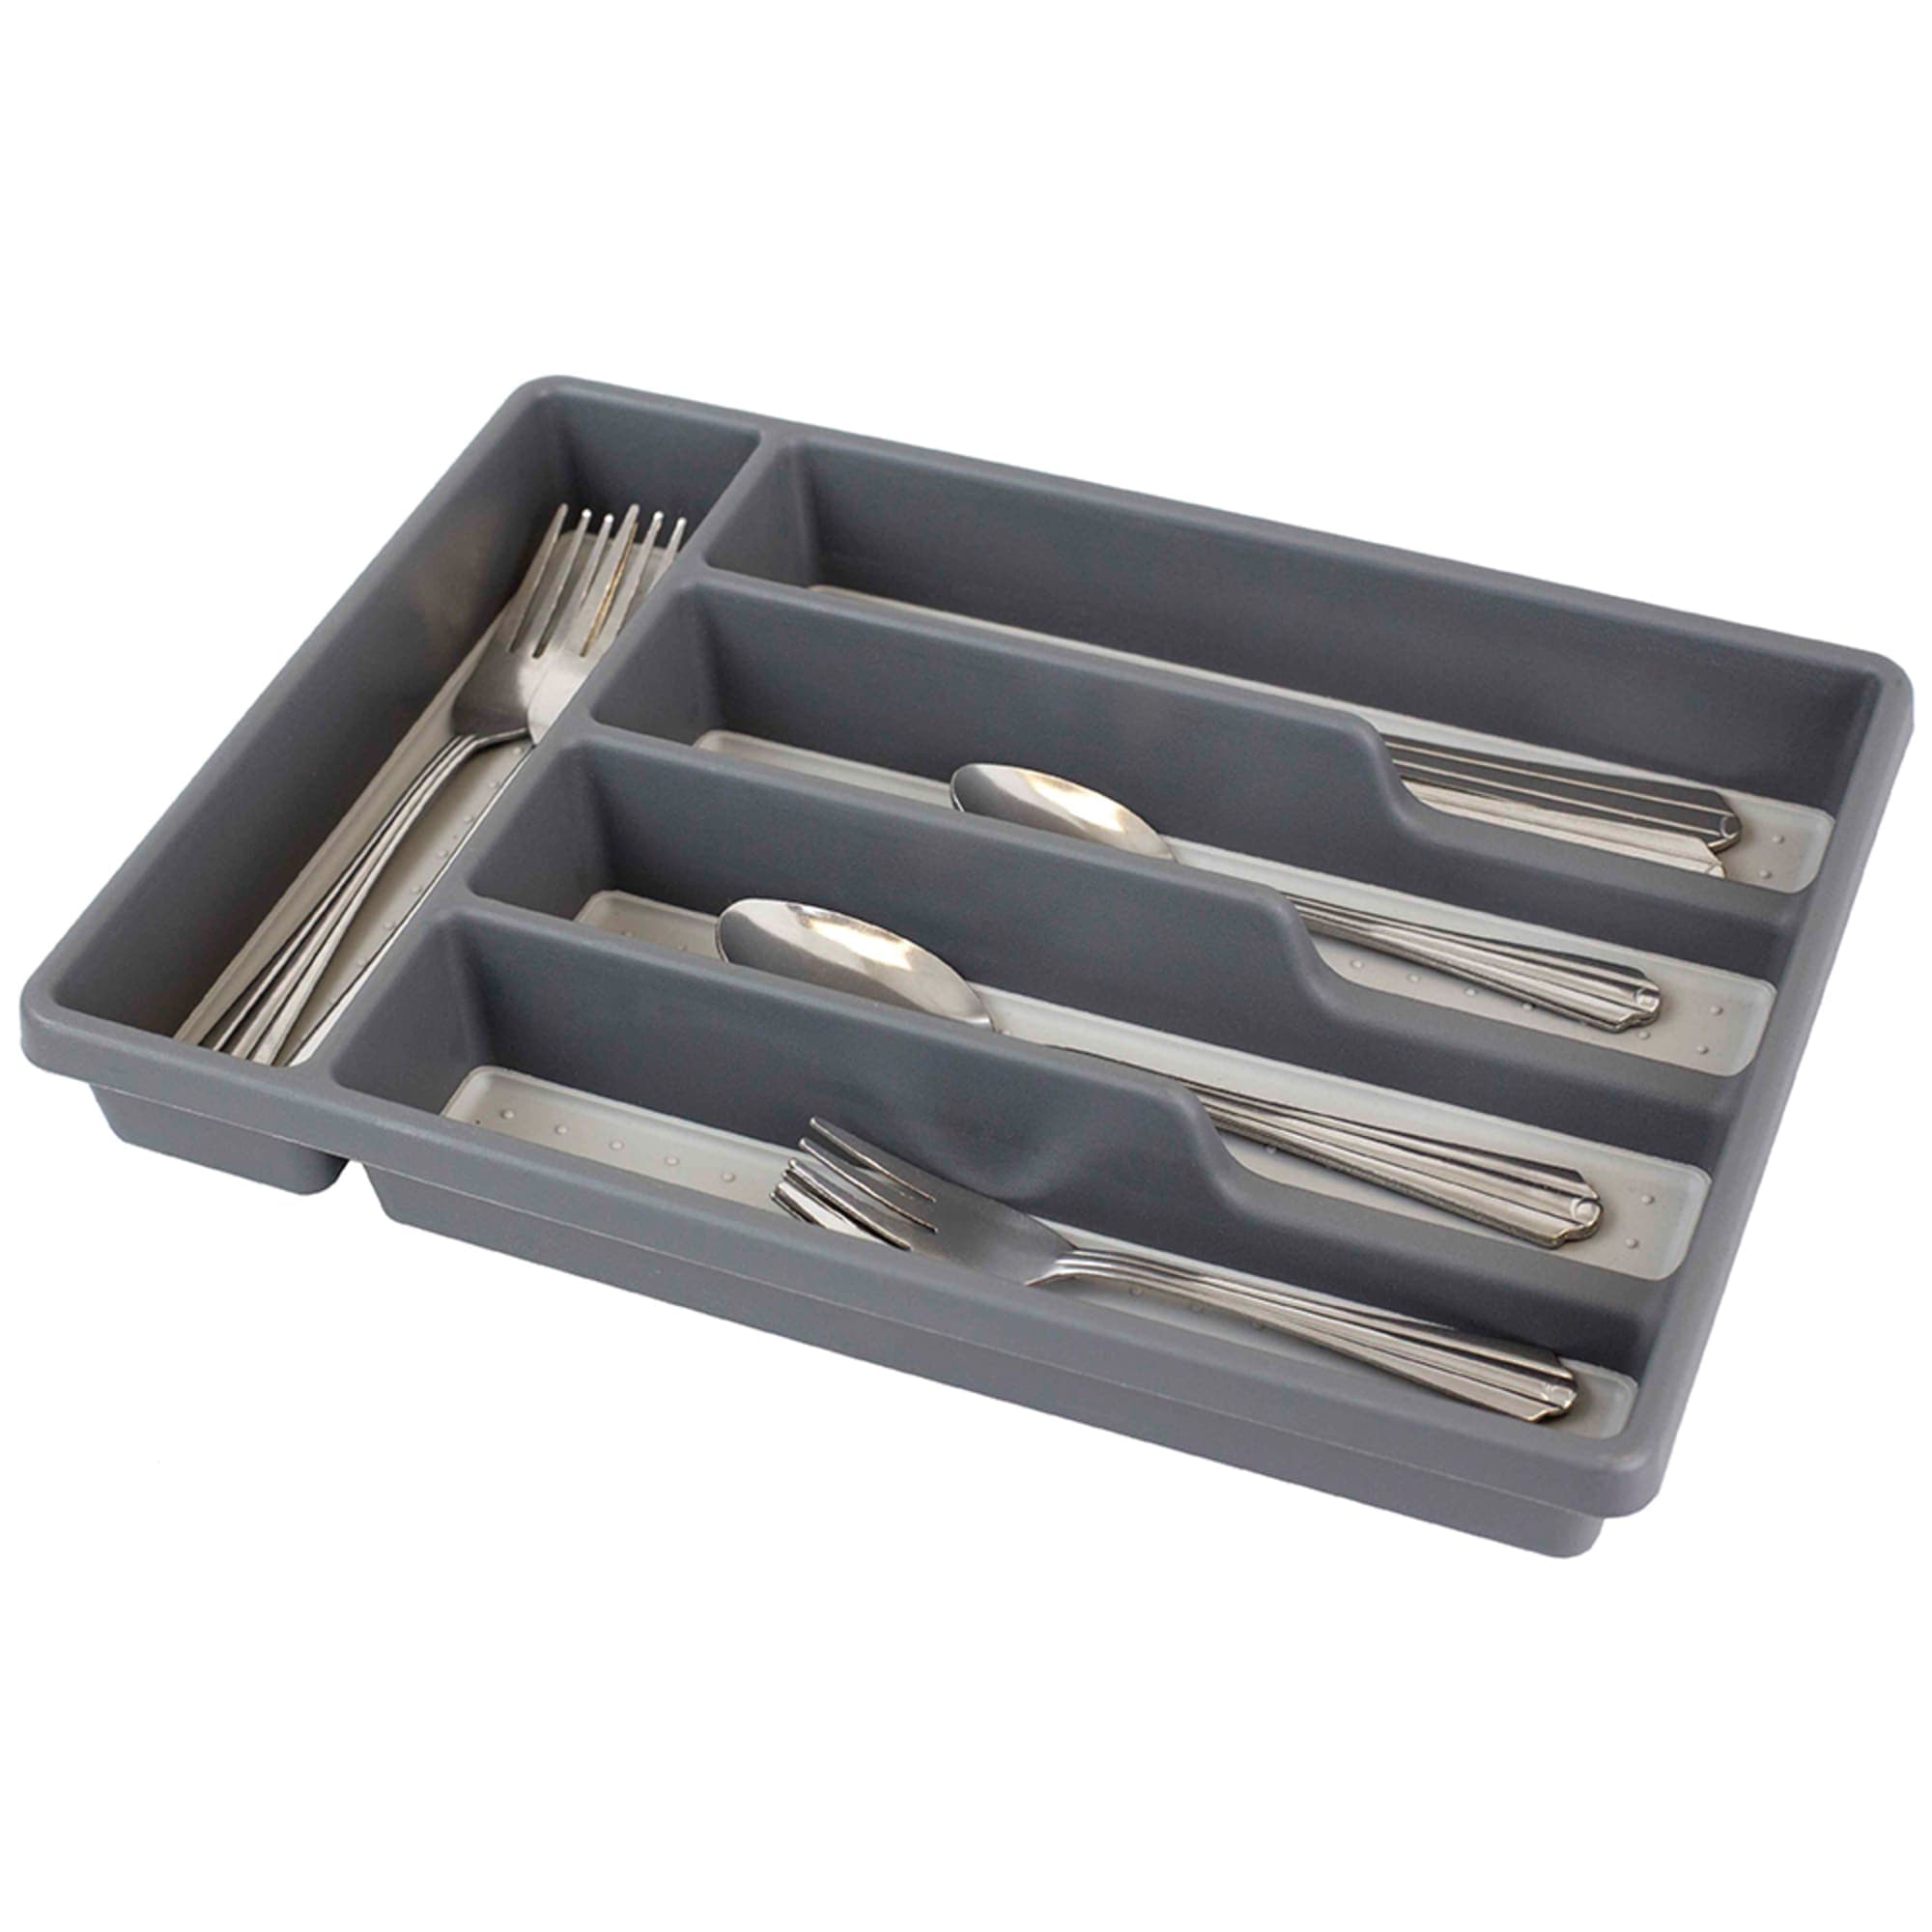 Home Basics Plastic Flatware Organizer with Rubber Liner, Light Grey $5.00 EACH, CASE PACK OF 12